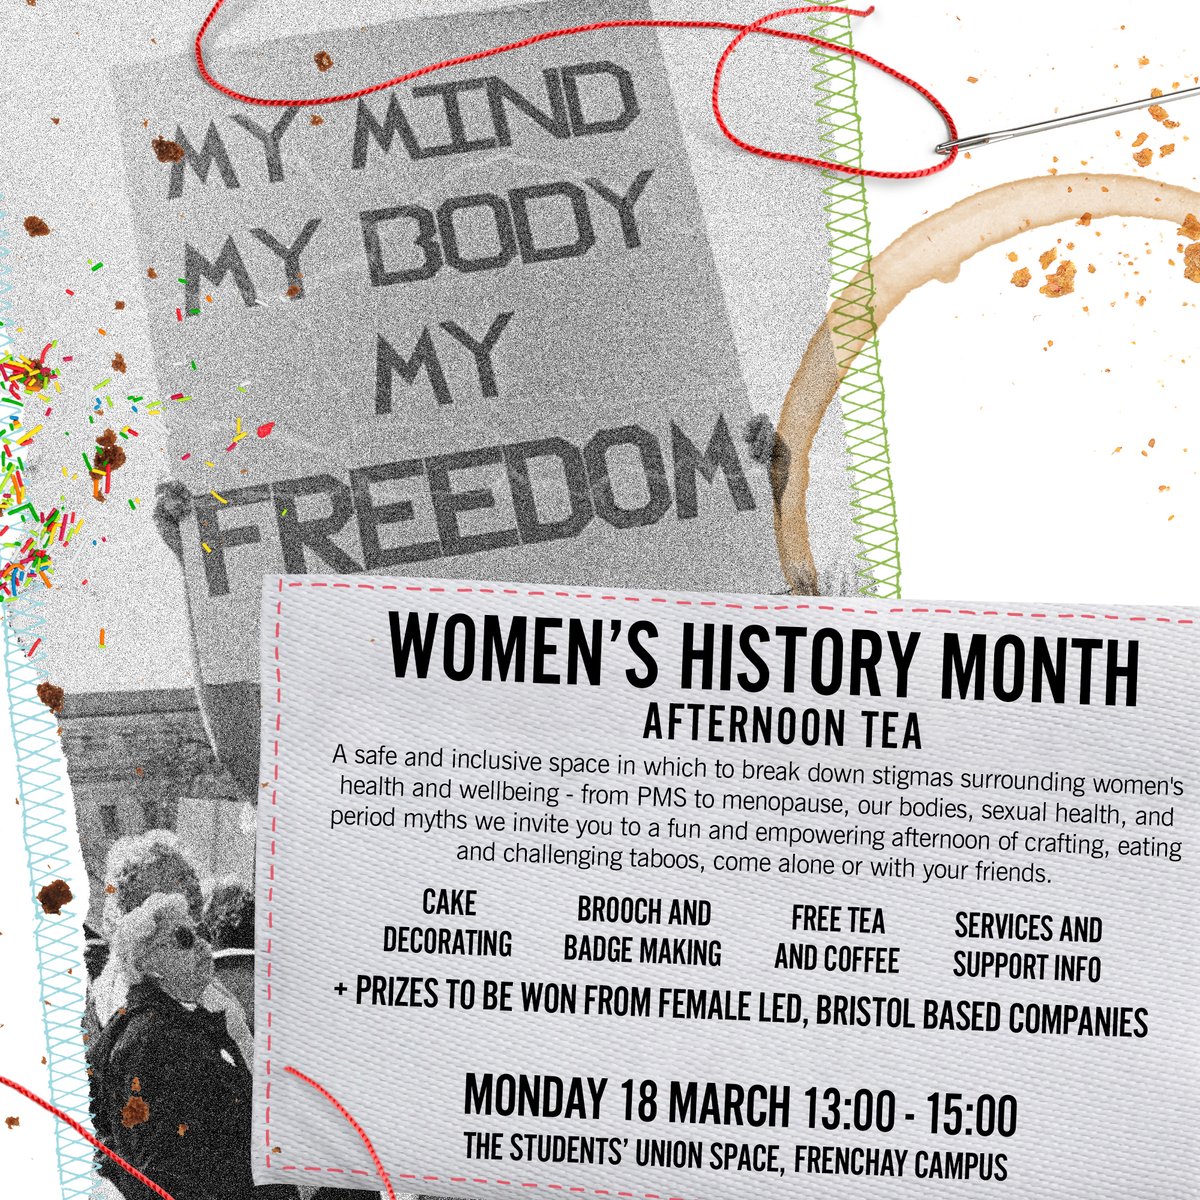 🎨🌸 Dive into women's health topics with scones, cakes, and crafting! Free tea/coffee included. Discover services & win prizes from Bristol-based companies! 📍 Frenchay: Mar 18, 13:00-14:30 📍 Bower Ashton: Mar 21, 12:00-14:00 📍 Glenside: Mar 25, 12:00-14:00.